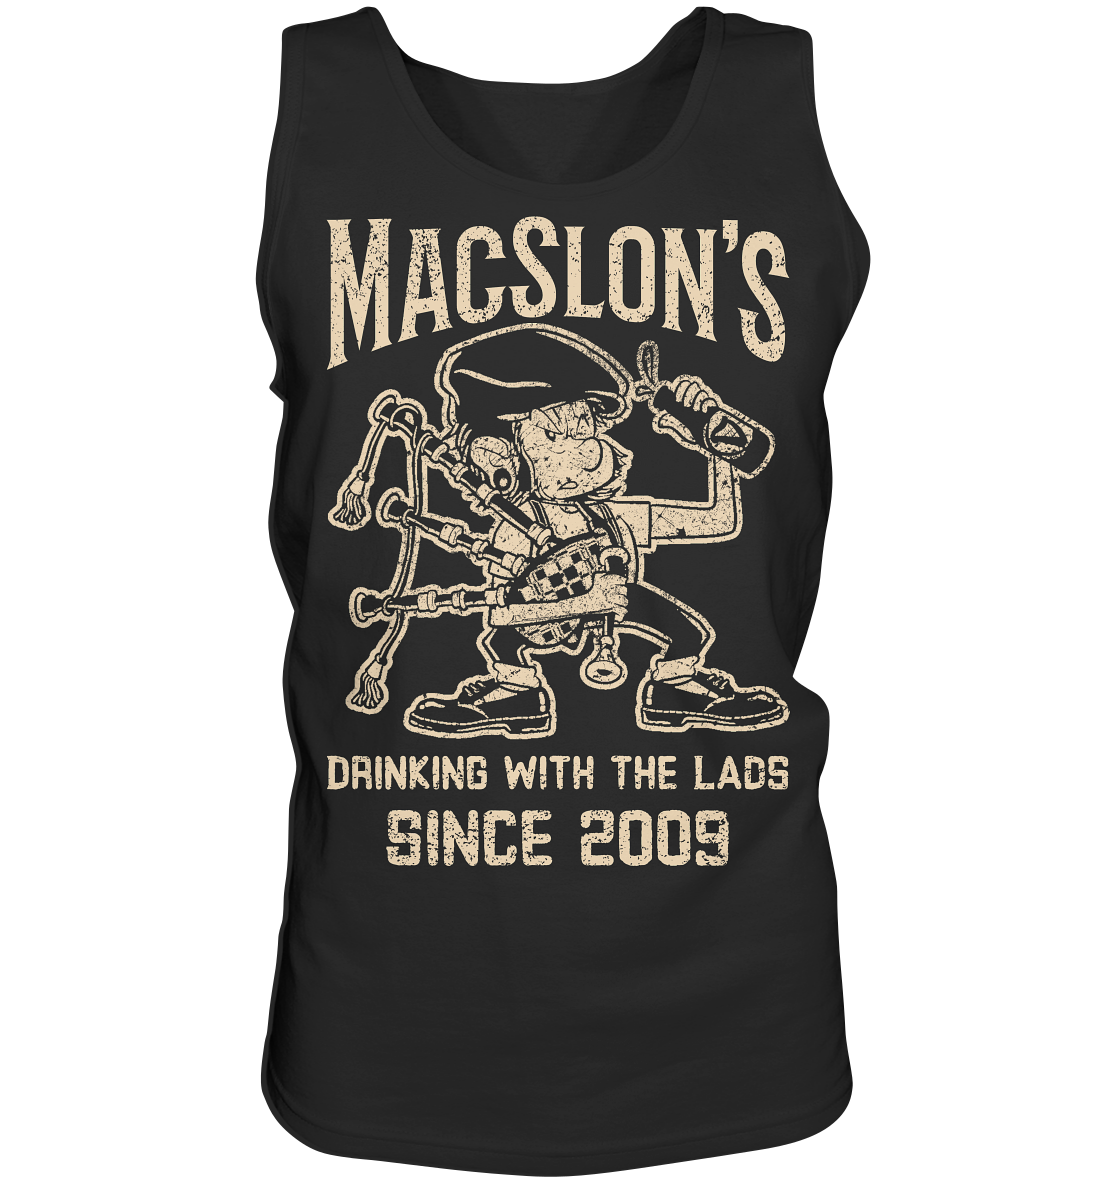 MacSlon's "Drinking With The Lads" - Tank-Top